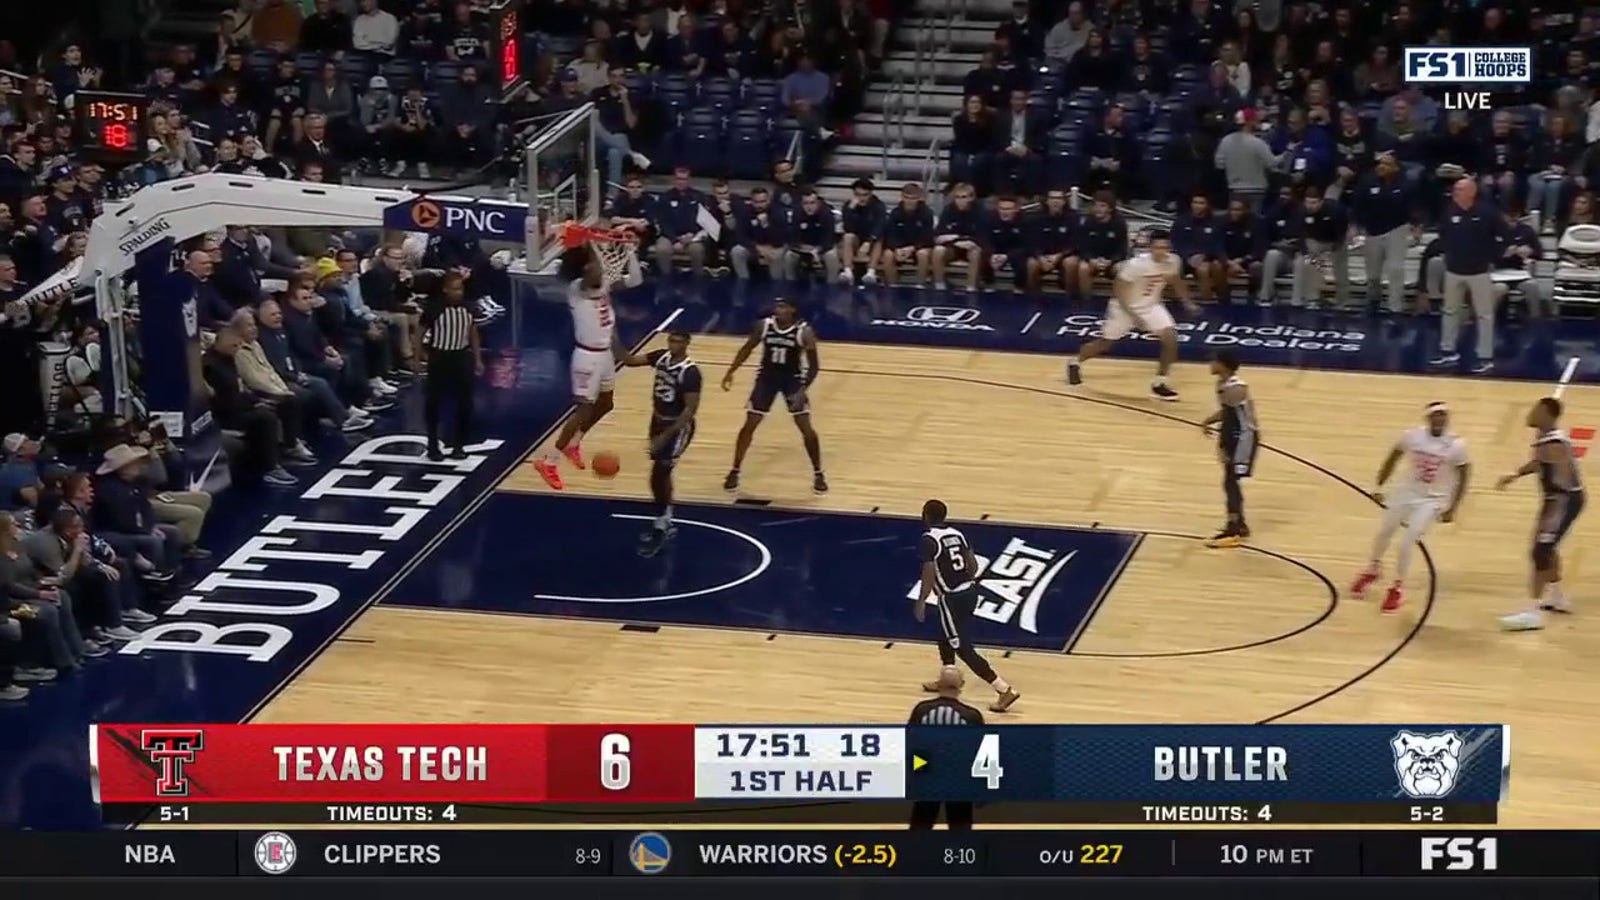 Texas Tech's Warren Washington throws down the two-handed alley-oop against Butler